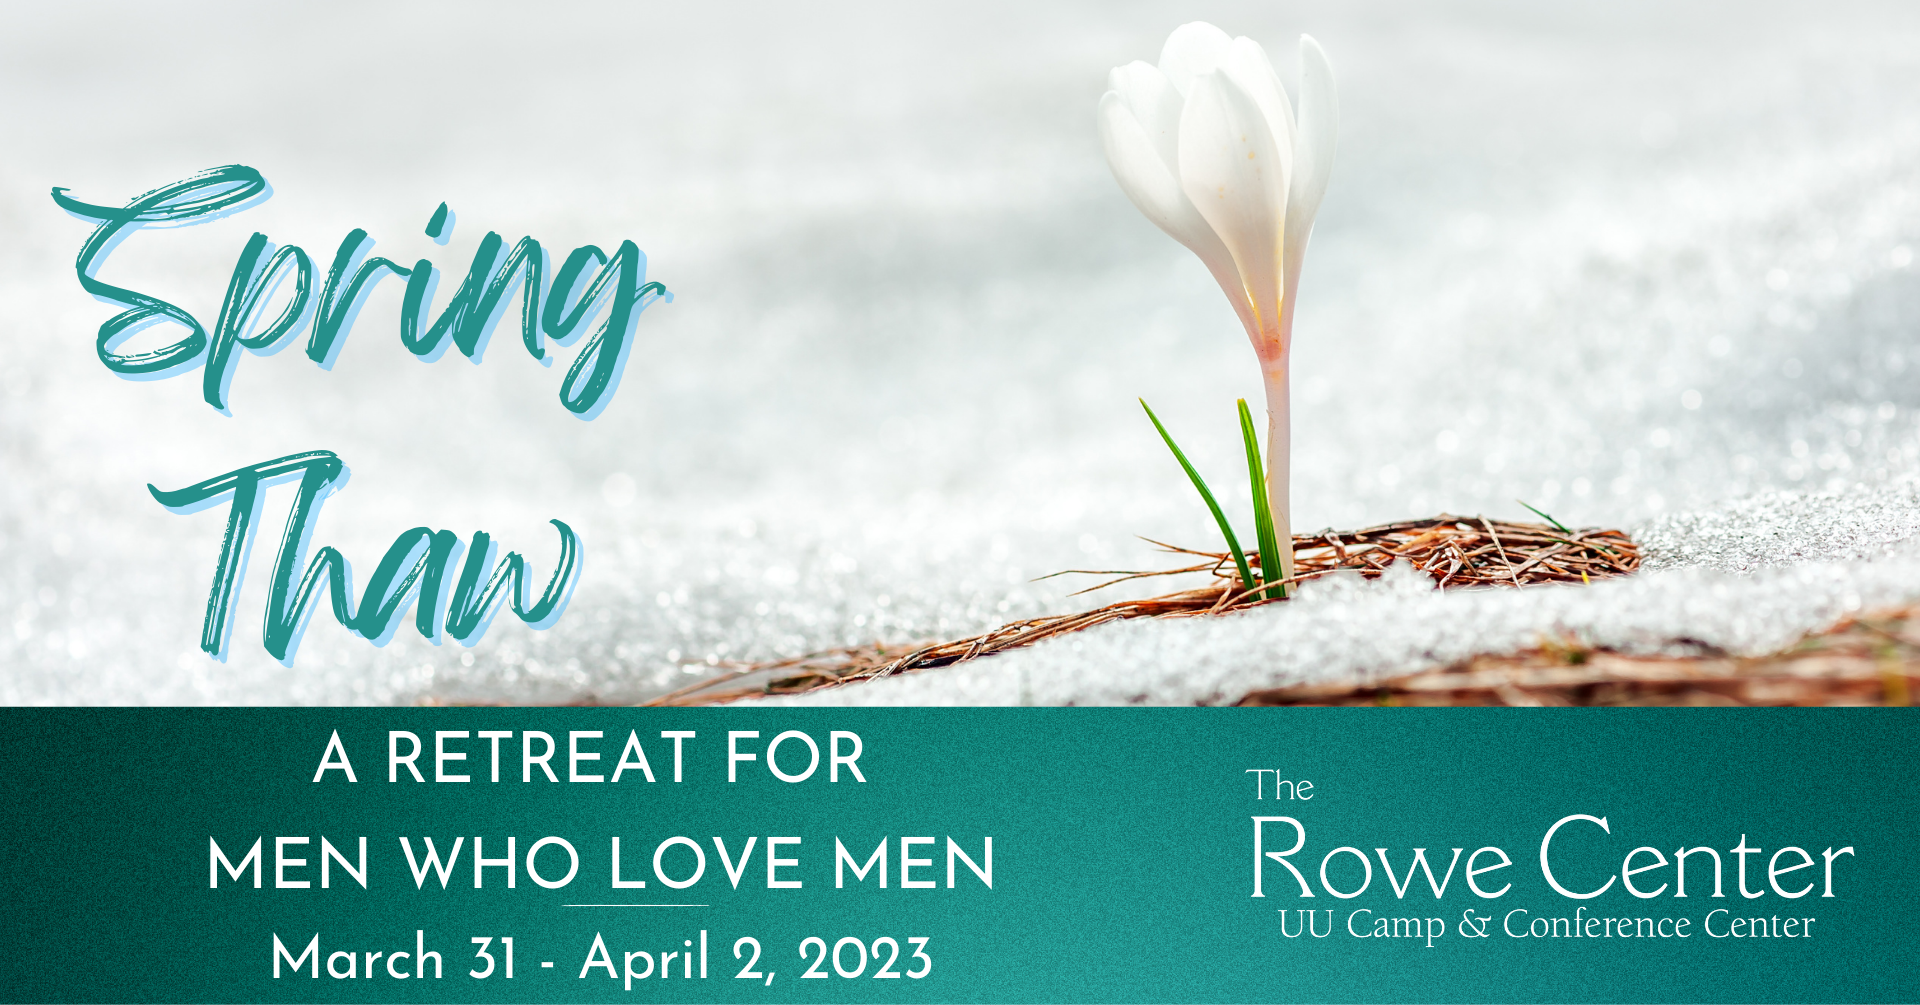 Spring Thaw: A Retreat for Men Who Love Men